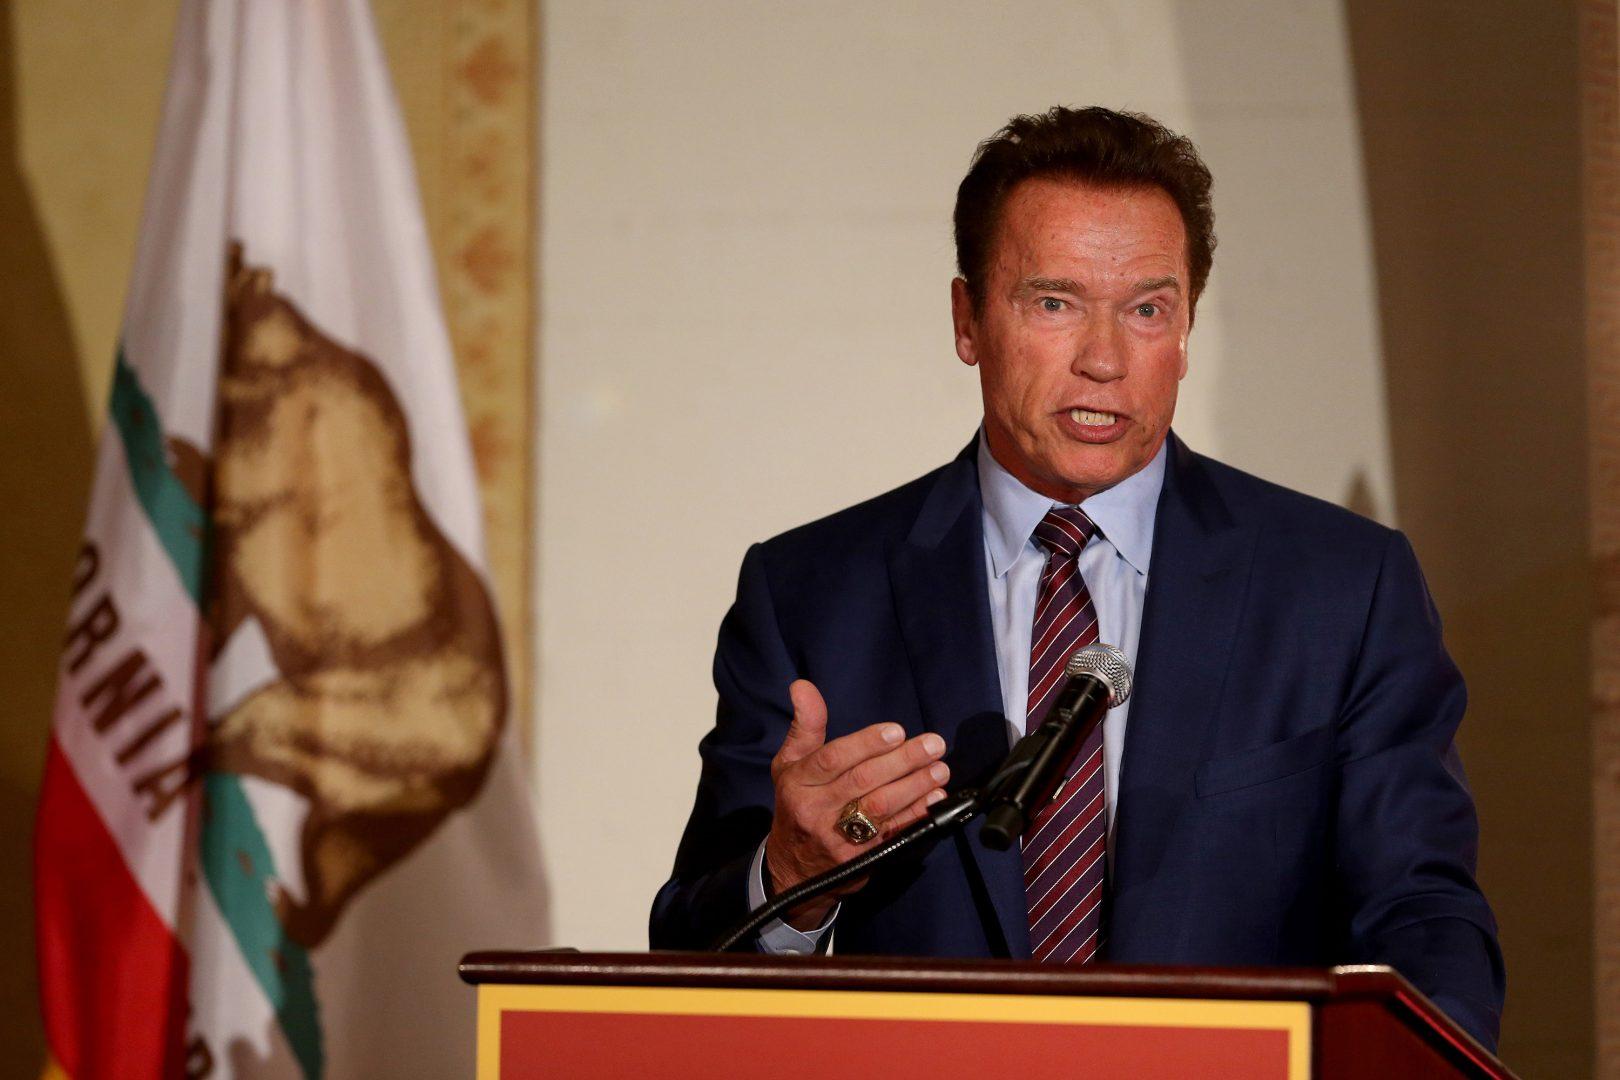 Former California Governor Arnold Schwarzenegger speaks on the Los Angeles campus of USC on April 5, 2017. (Rick Loomis/Los Angeles Times/TNS)